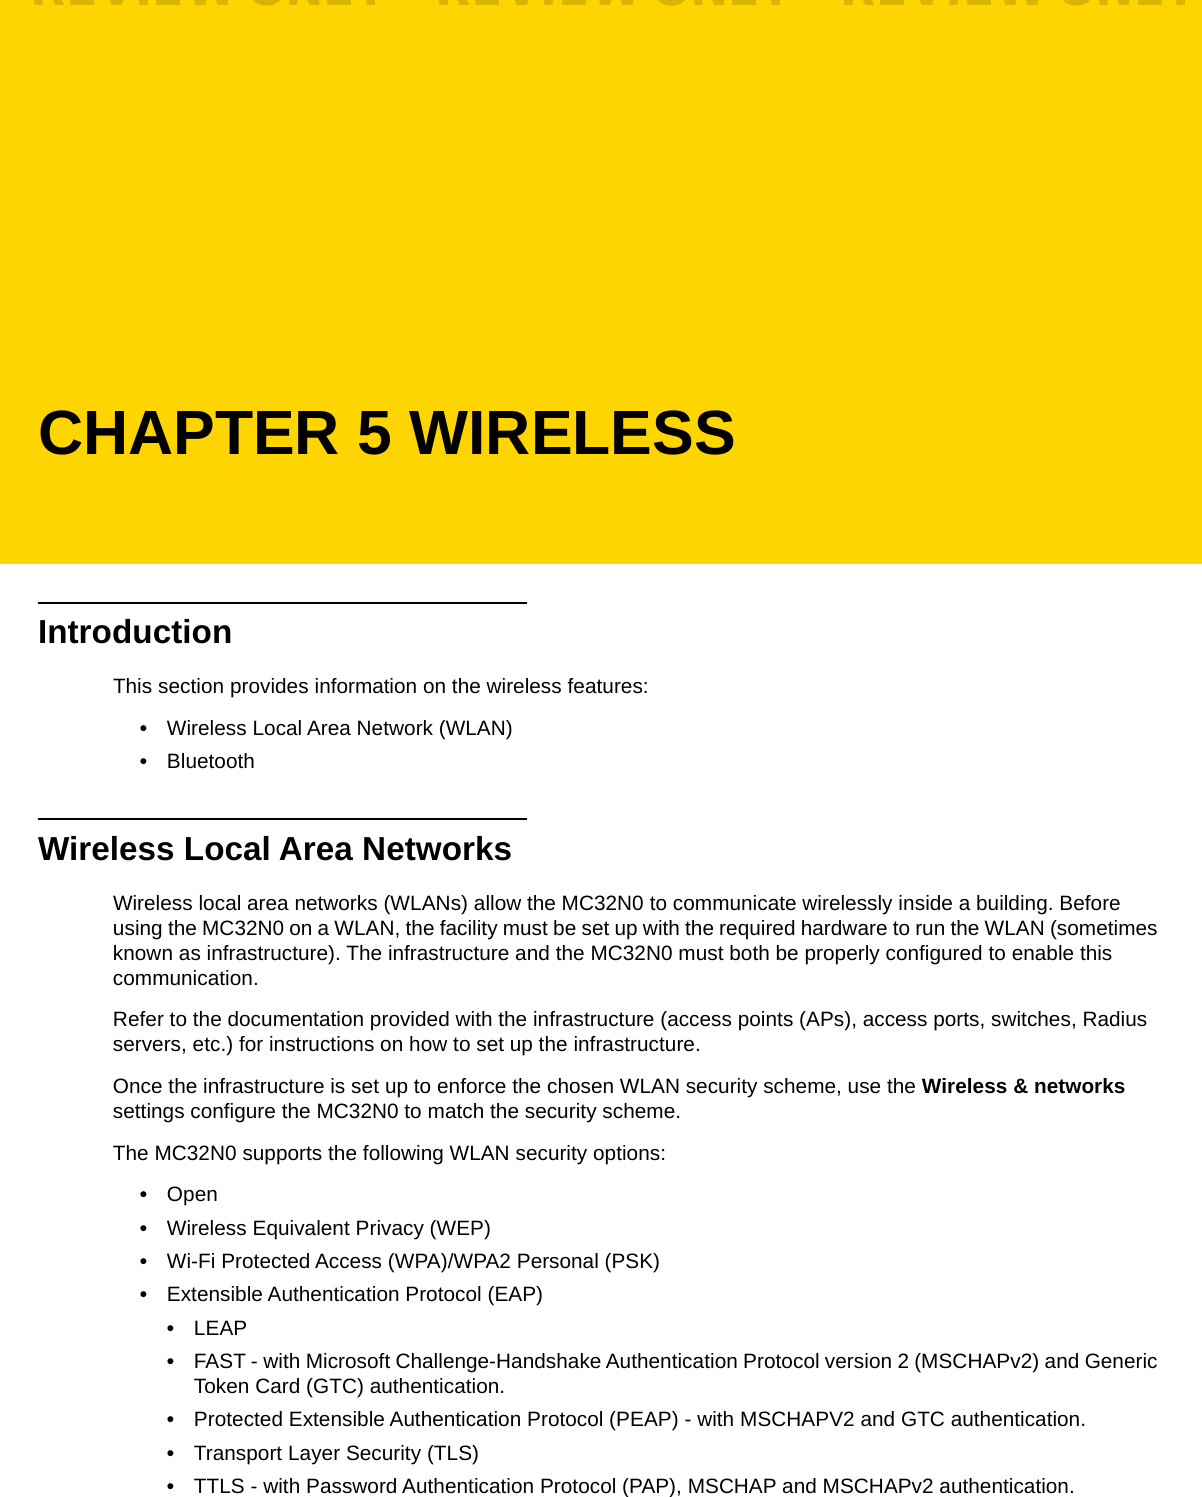 CHAPTER 5 WIRELESSIntroductionThis section provides information on the wireless features:•Wireless Local Area Network (WLAN)•BluetoothWireless Local Area NetworksWireless local area networks (WLANs) allow the MC32N0 to communicate wirelessly inside a building. Before using the MC32N0 on a WLAN, the facility must be set up with the required hardware to run the WLAN (sometimes known as infrastructure). The infrastructure and the MC32N0 must both be properly configured to enable this communication.Refer to the documentation provided with the infrastructure (access points (APs), access ports, switches, Radius servers, etc.) for instructions on how to set up the infrastructure.Once the infrastructure is set up to enforce the chosen WLAN security scheme, use the Wireless &amp; networks settings configure the MC32N0 to match the security scheme.The MC32N0 supports the following WLAN security options:•Open•Wireless Equivalent Privacy (WEP)•Wi-Fi Protected Access (WPA)/WPA2 Personal (PSK)•Extensible Authentication Protocol (EAP)•LEAP•FAST - with Microsoft Challenge-Handshake Authentication Protocol version 2 (MSCHAPv2) and Generic Token Card (GTC) authentication.•Protected Extensible Authentication Protocol (PEAP) - with MSCHAPV2 and GTC authentication.•Transport Layer Security (TLS)•TTLS - with Password Authentication Protocol (PAP), MSCHAP and MSCHAPv2 authentication.REVIEW ONLY - REVIEW ONLY - REVIEW ONLY                             REVIEW ONLY - REVIEW ONLY - REVIEW ONLY